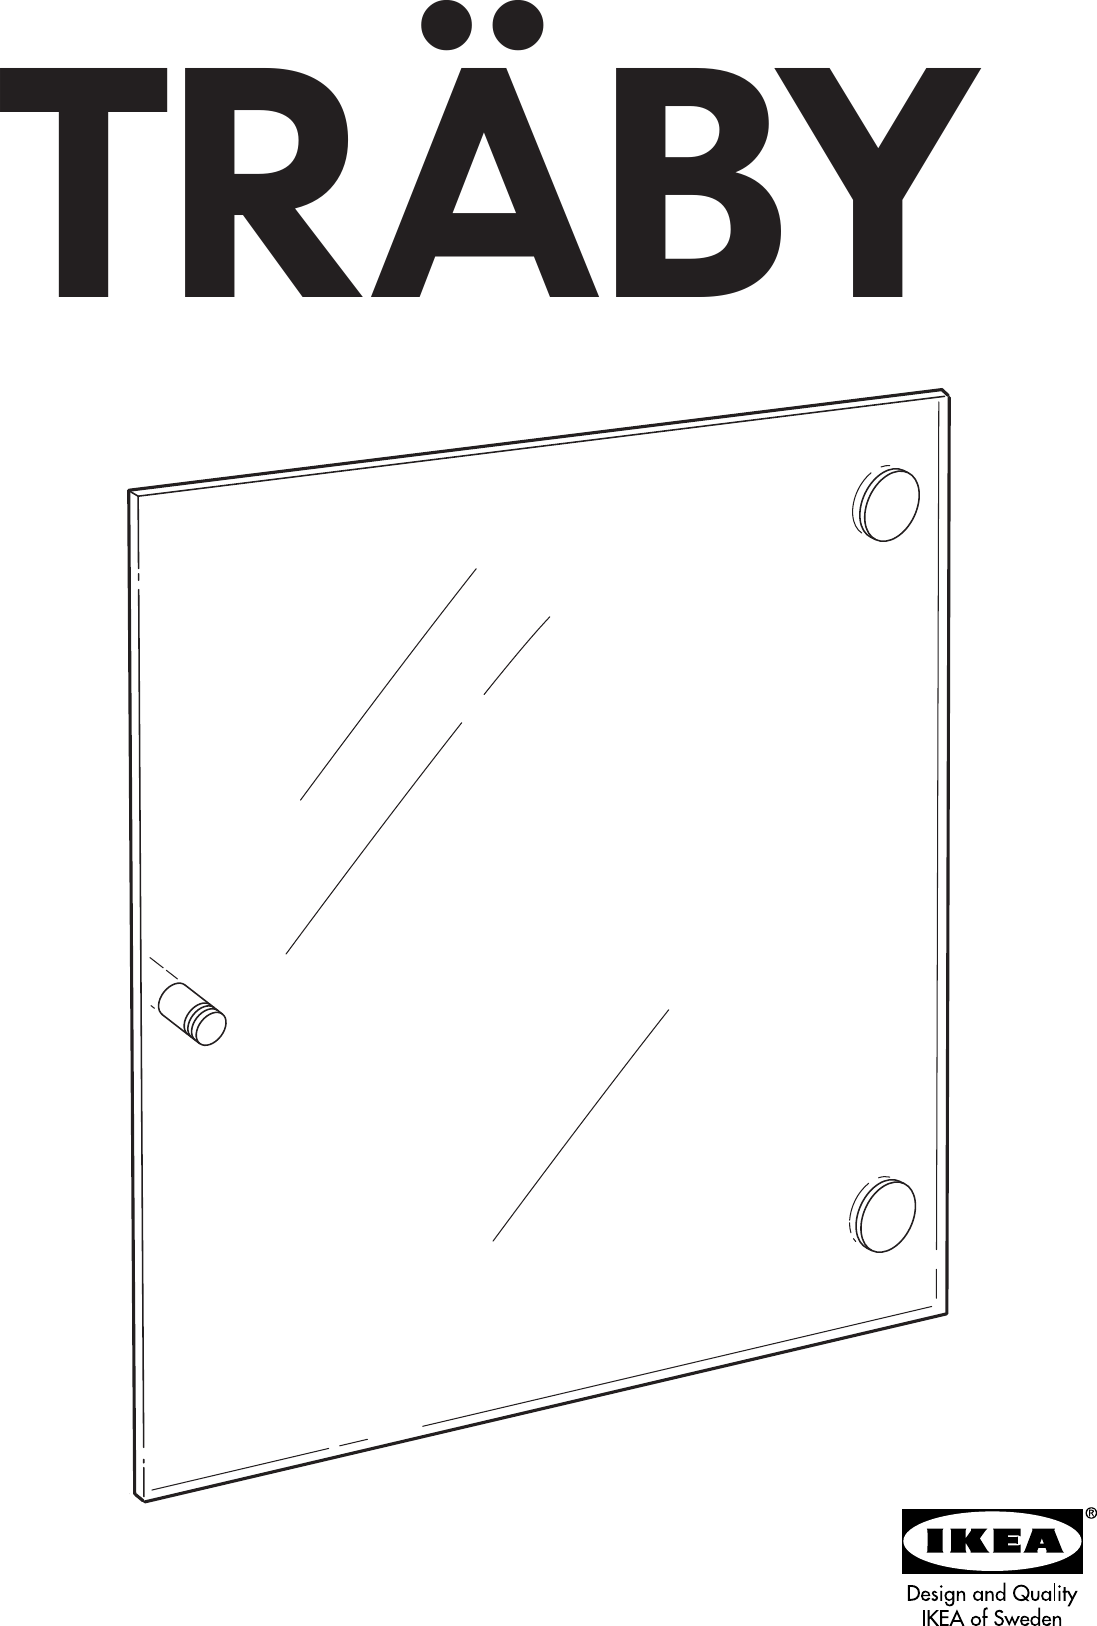 Page 1 of 8 - Ikea Ikea-Traby-Glass-Door-13-3-4X13-3-4-Assembly-Instruction